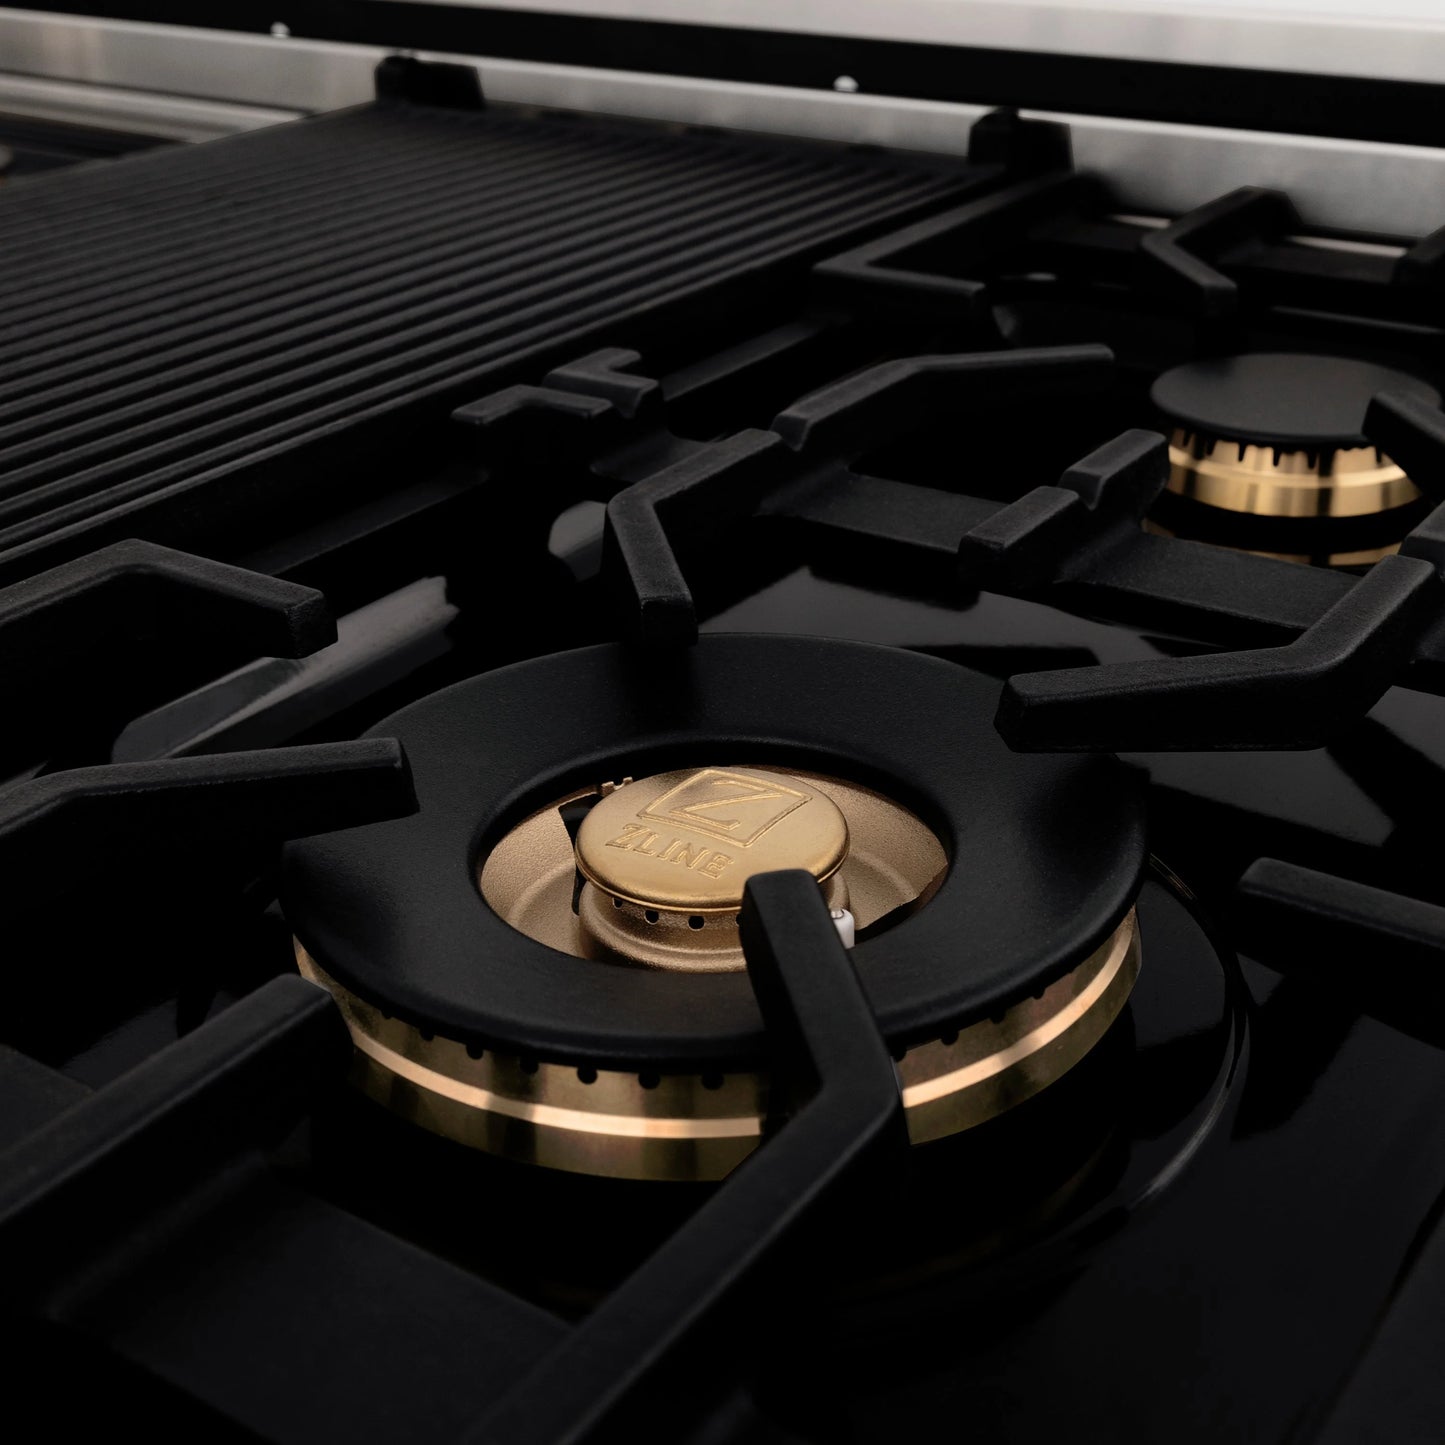 ZLINE Autograph Edition 48 in. Porcelain Rangetop with 7 Gas Burners in Stainless Steel with Polished Gold Accents (RTZ-48-G)